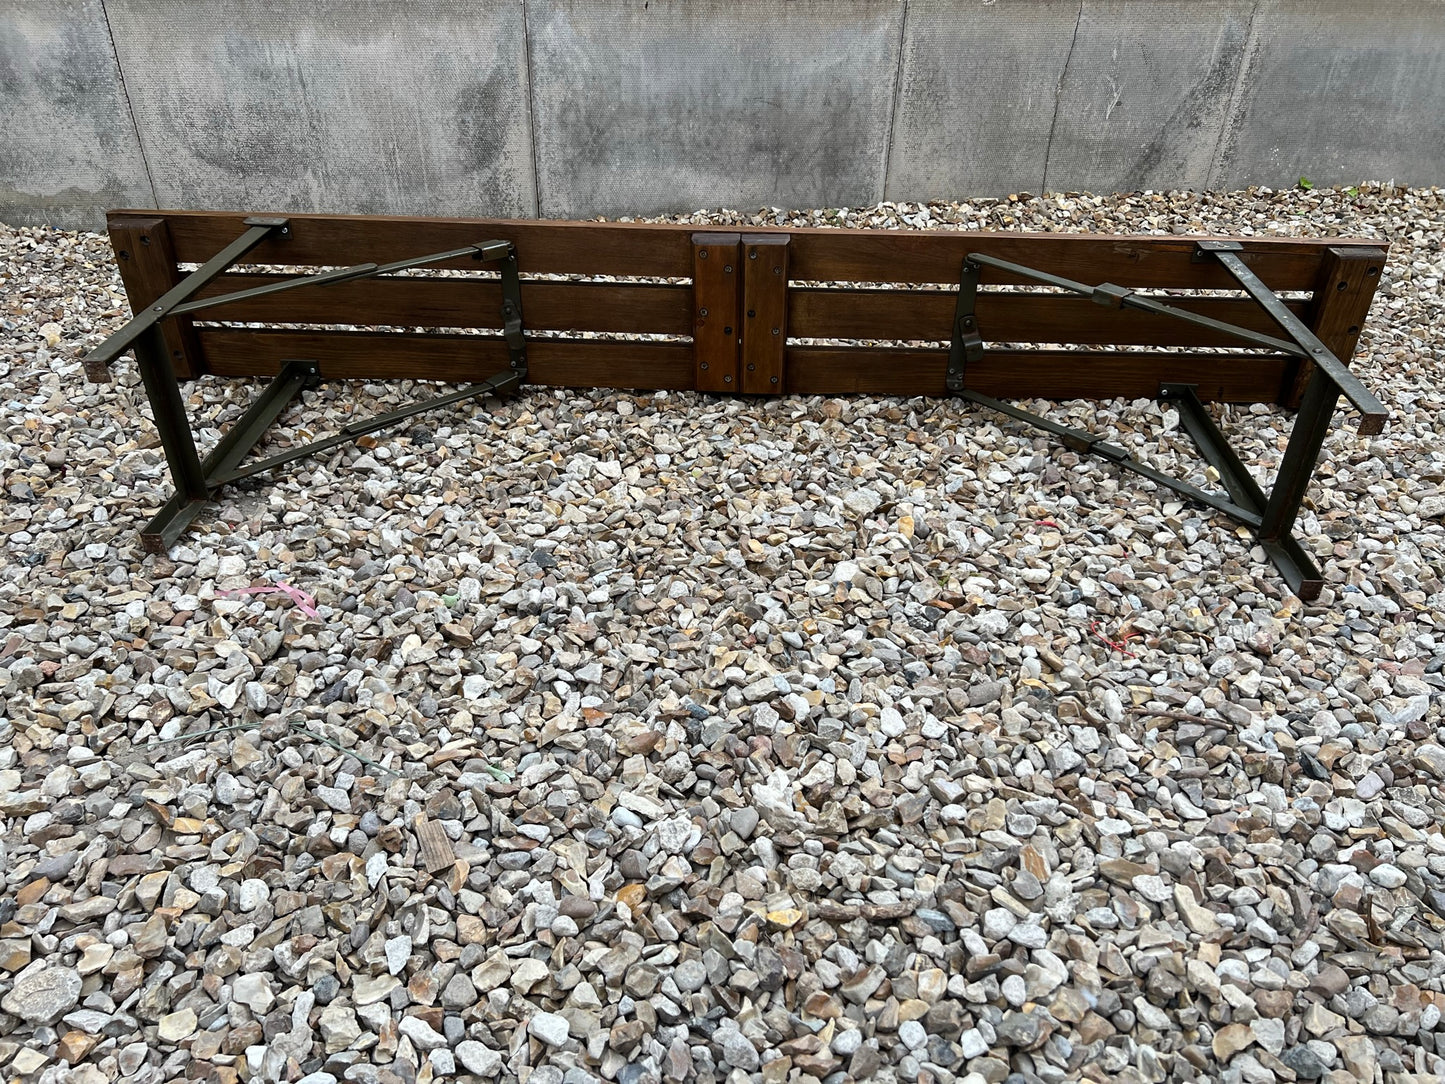 Rustic Industrial Bench Wooden Folding Trestle Bench Farmhouse Dining Camping Seat Reclaimed Army